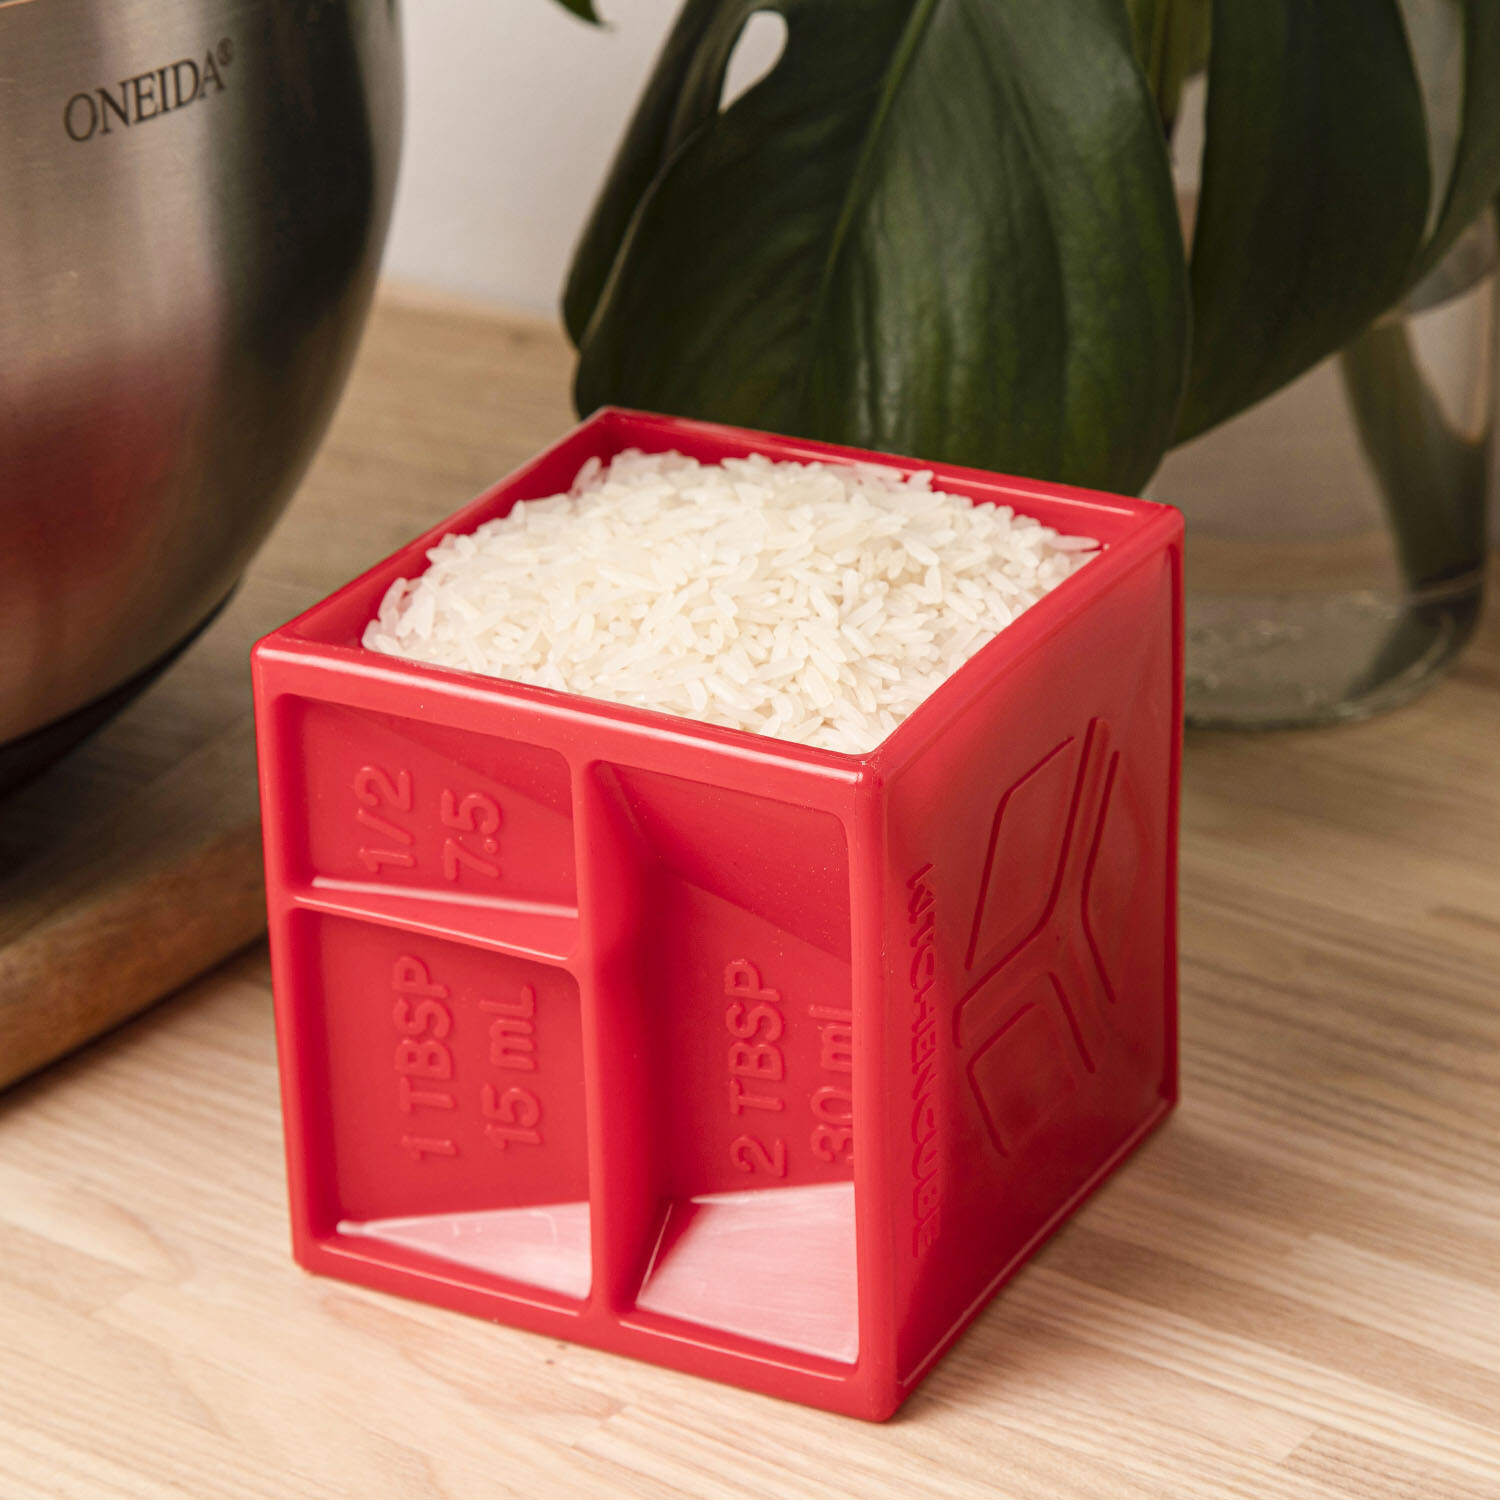 All-in-One Measuring Cube – Altamatic